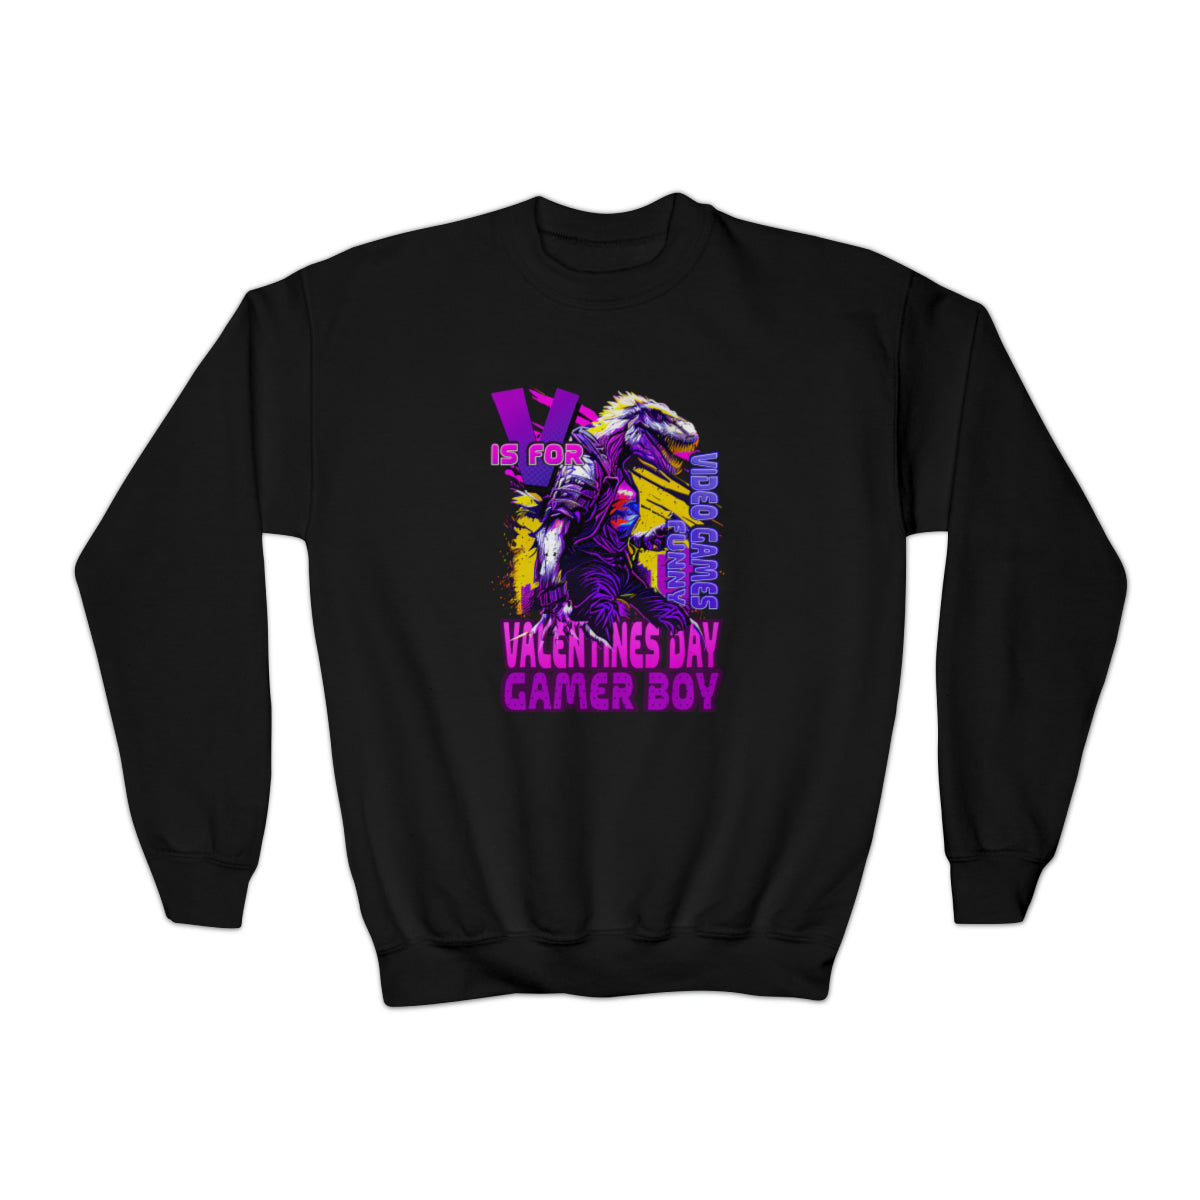 V Is For Valentines: The Fun And Funny Gamer Crewneck Sweatshirt